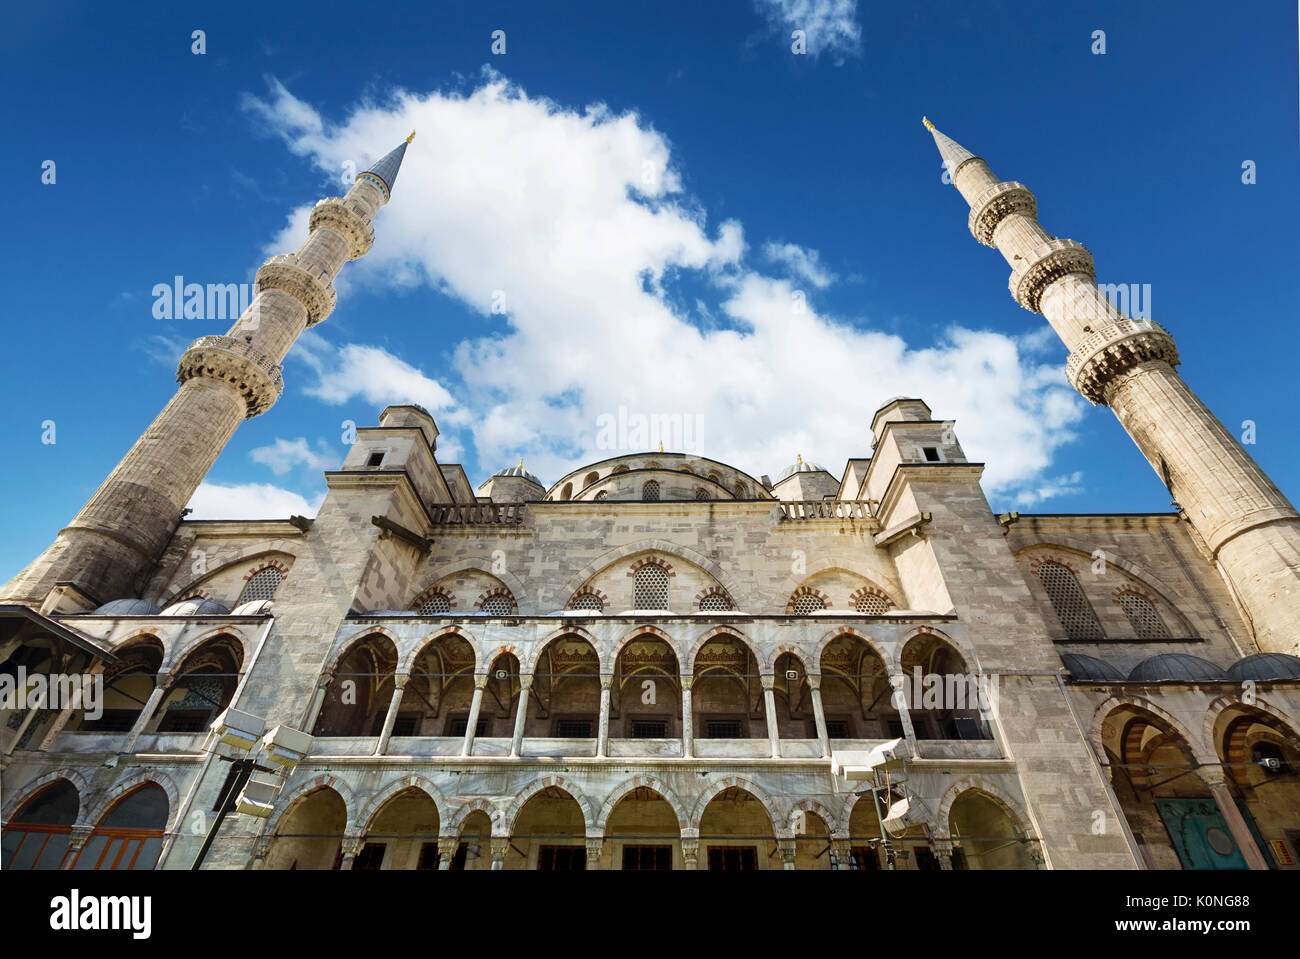 Scenic view of Istanbul famous landmark Blue Mosque over blue cloudy sky. Stock Photo